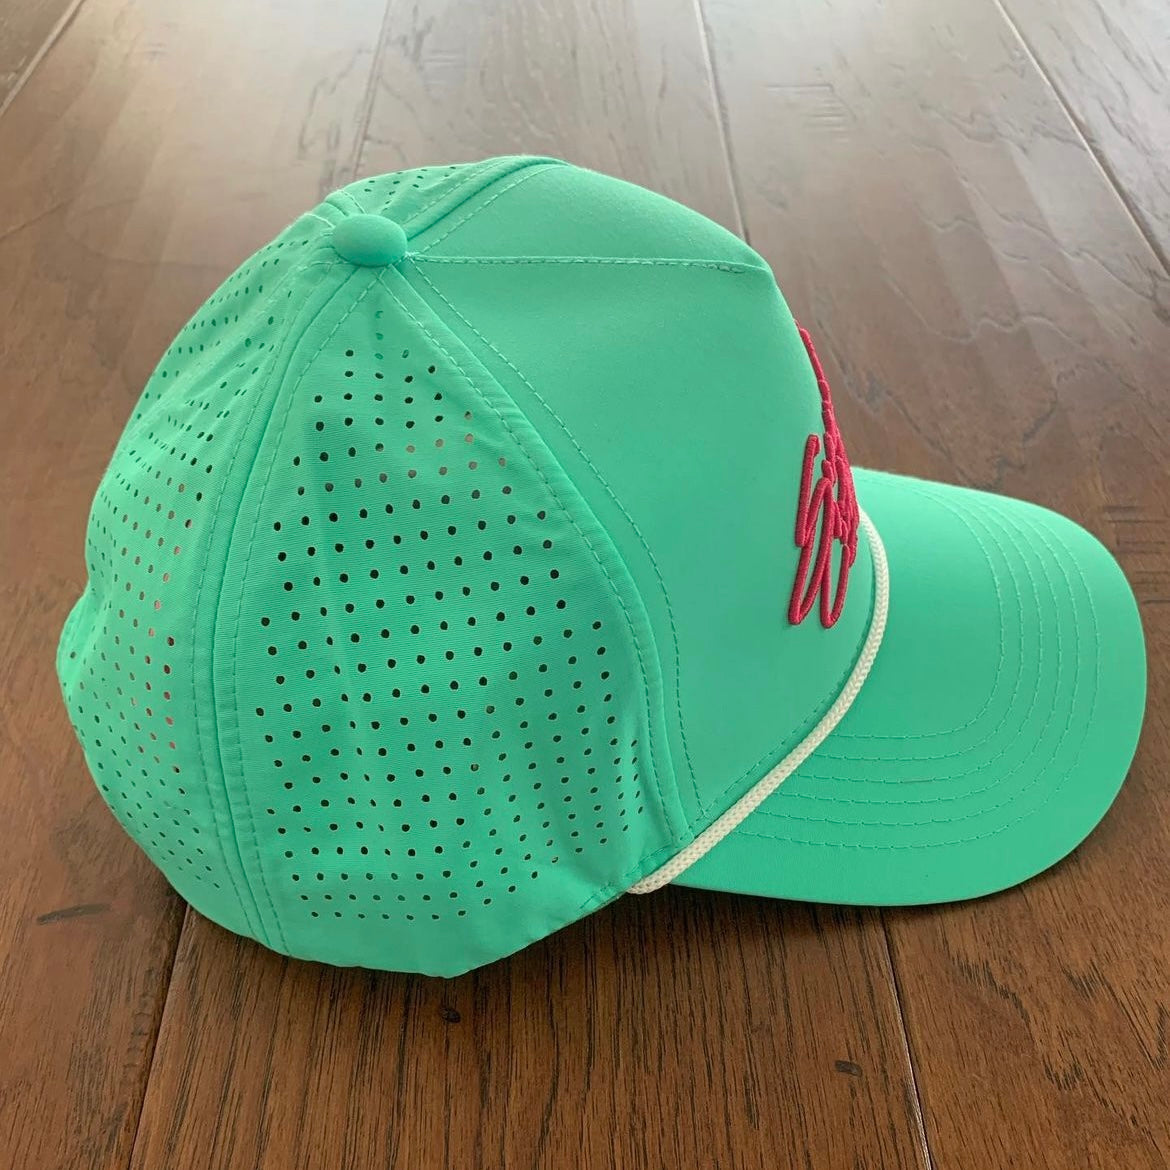 The Vice Hat